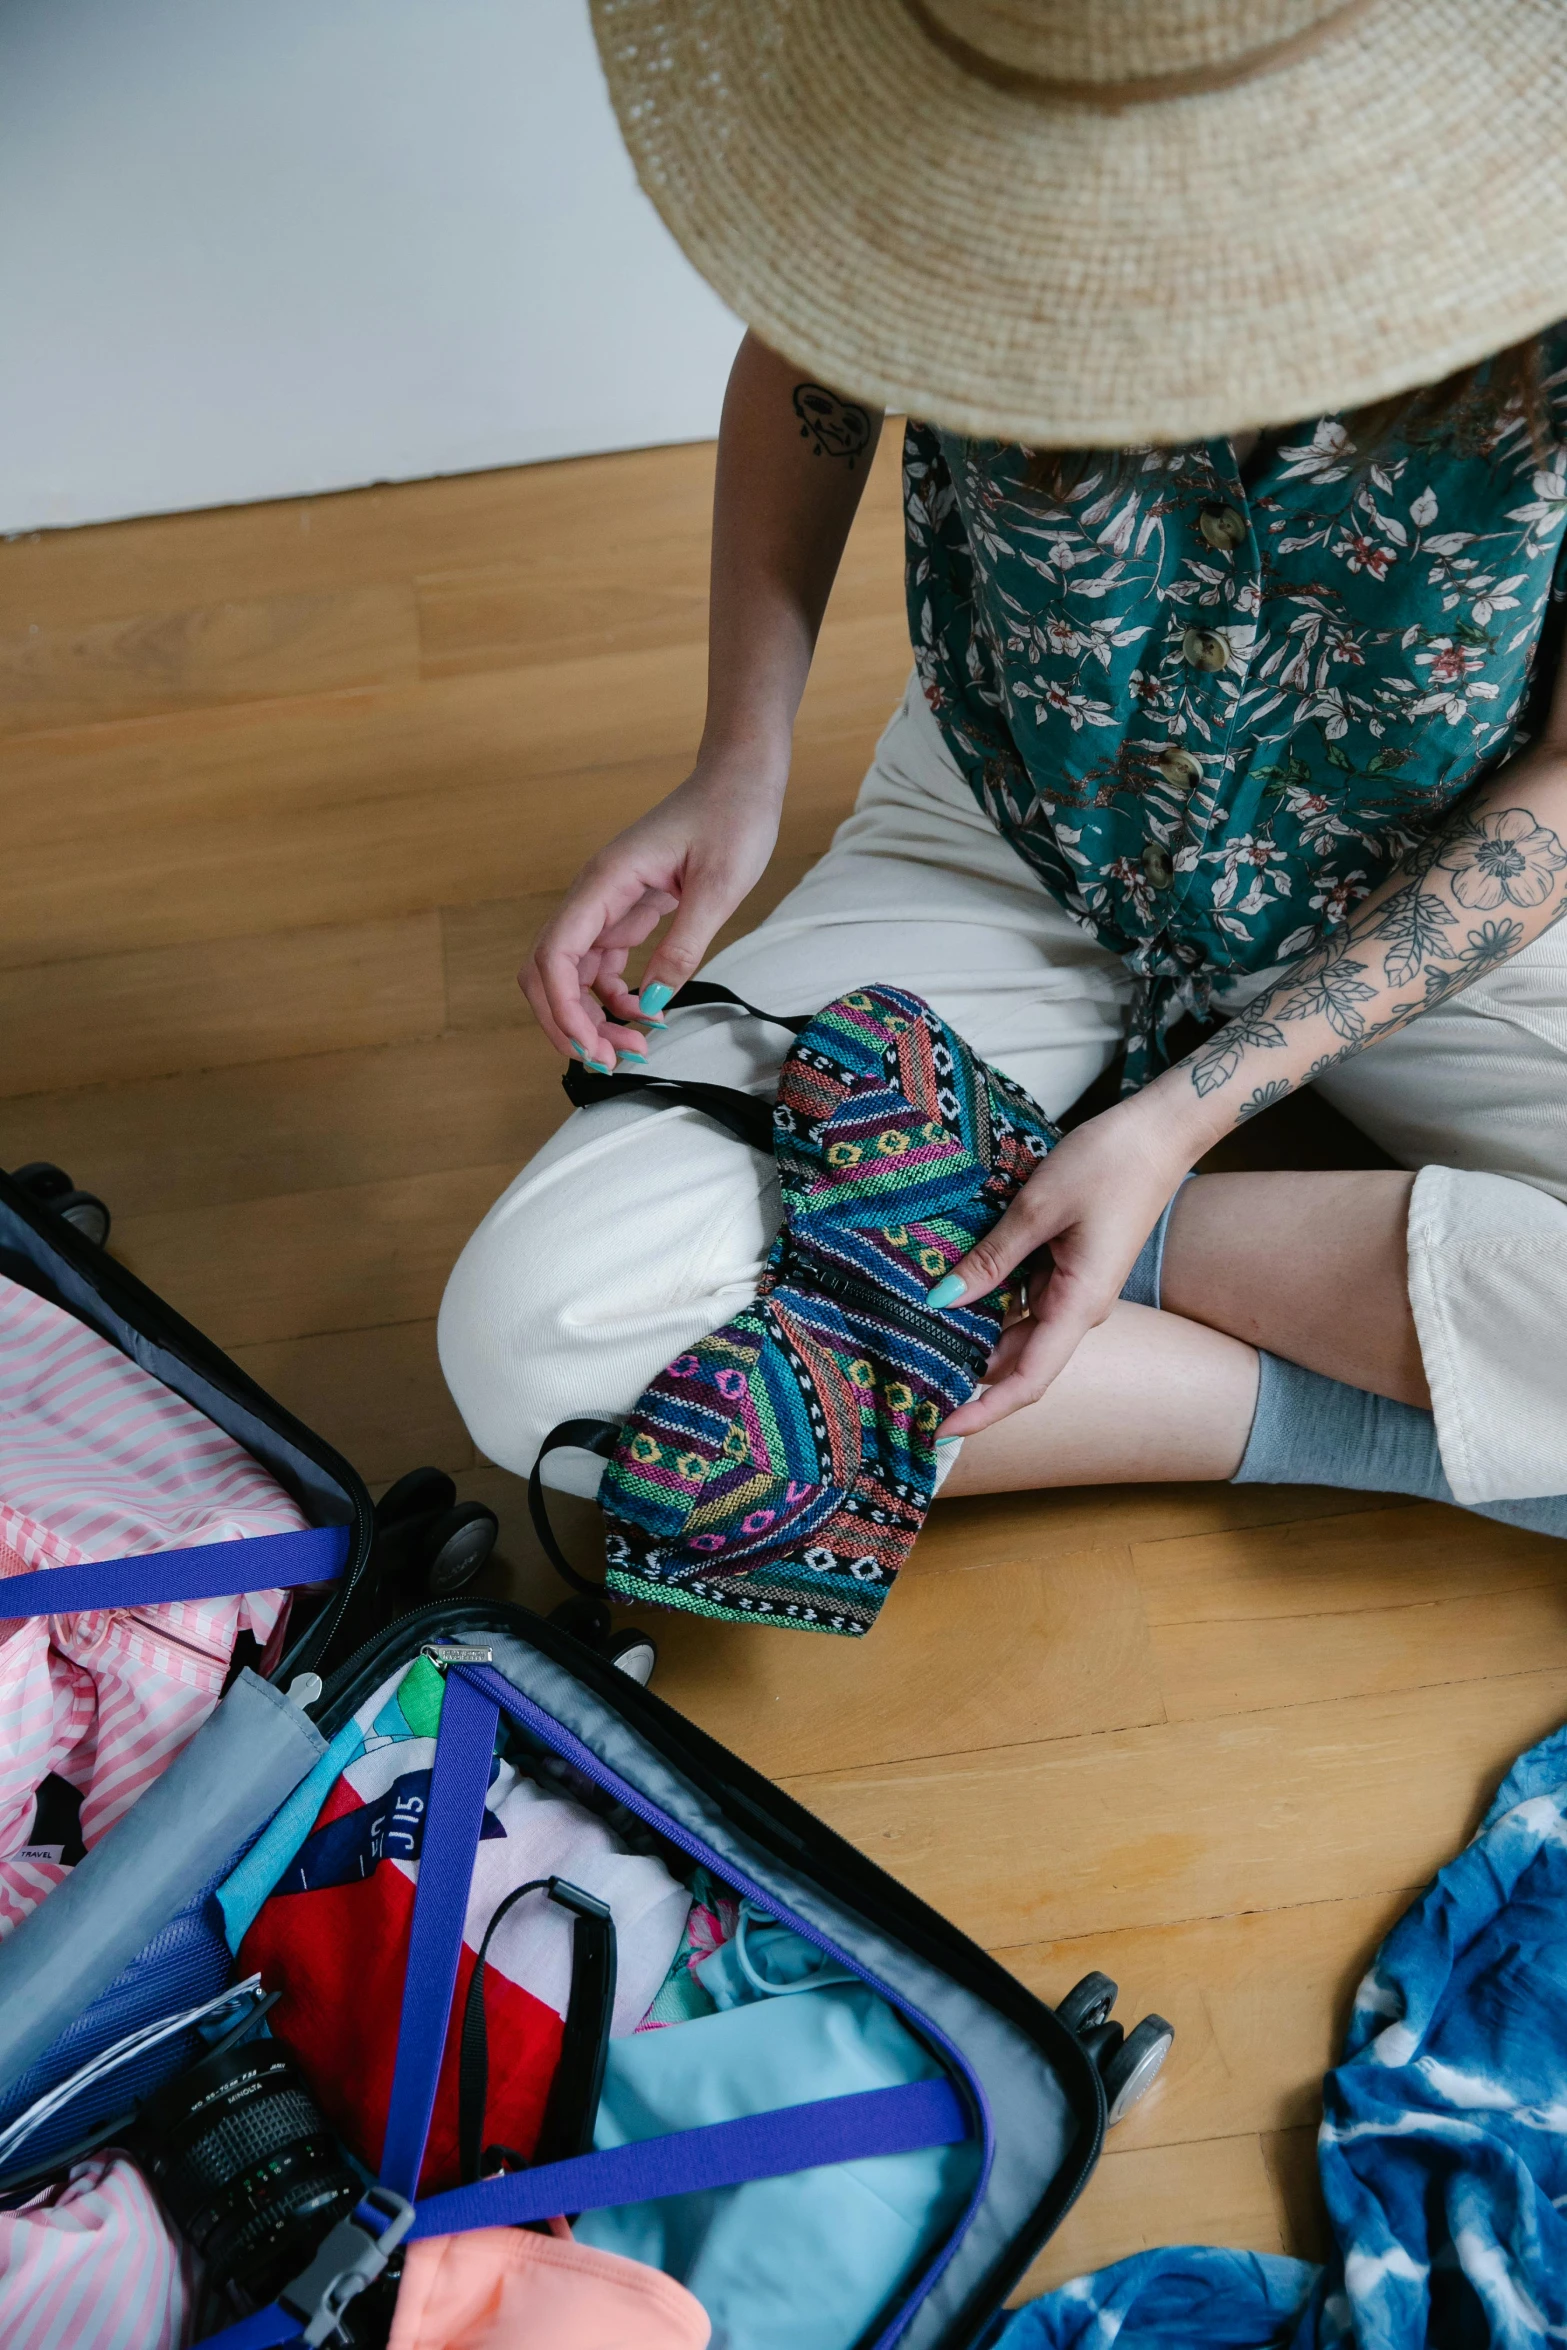 a woman sitting on the floor with a suitcase full of clothes, by Carey Morris, trending on pexels, patterned, blue undergarments, wearing adventure gear, avatar image